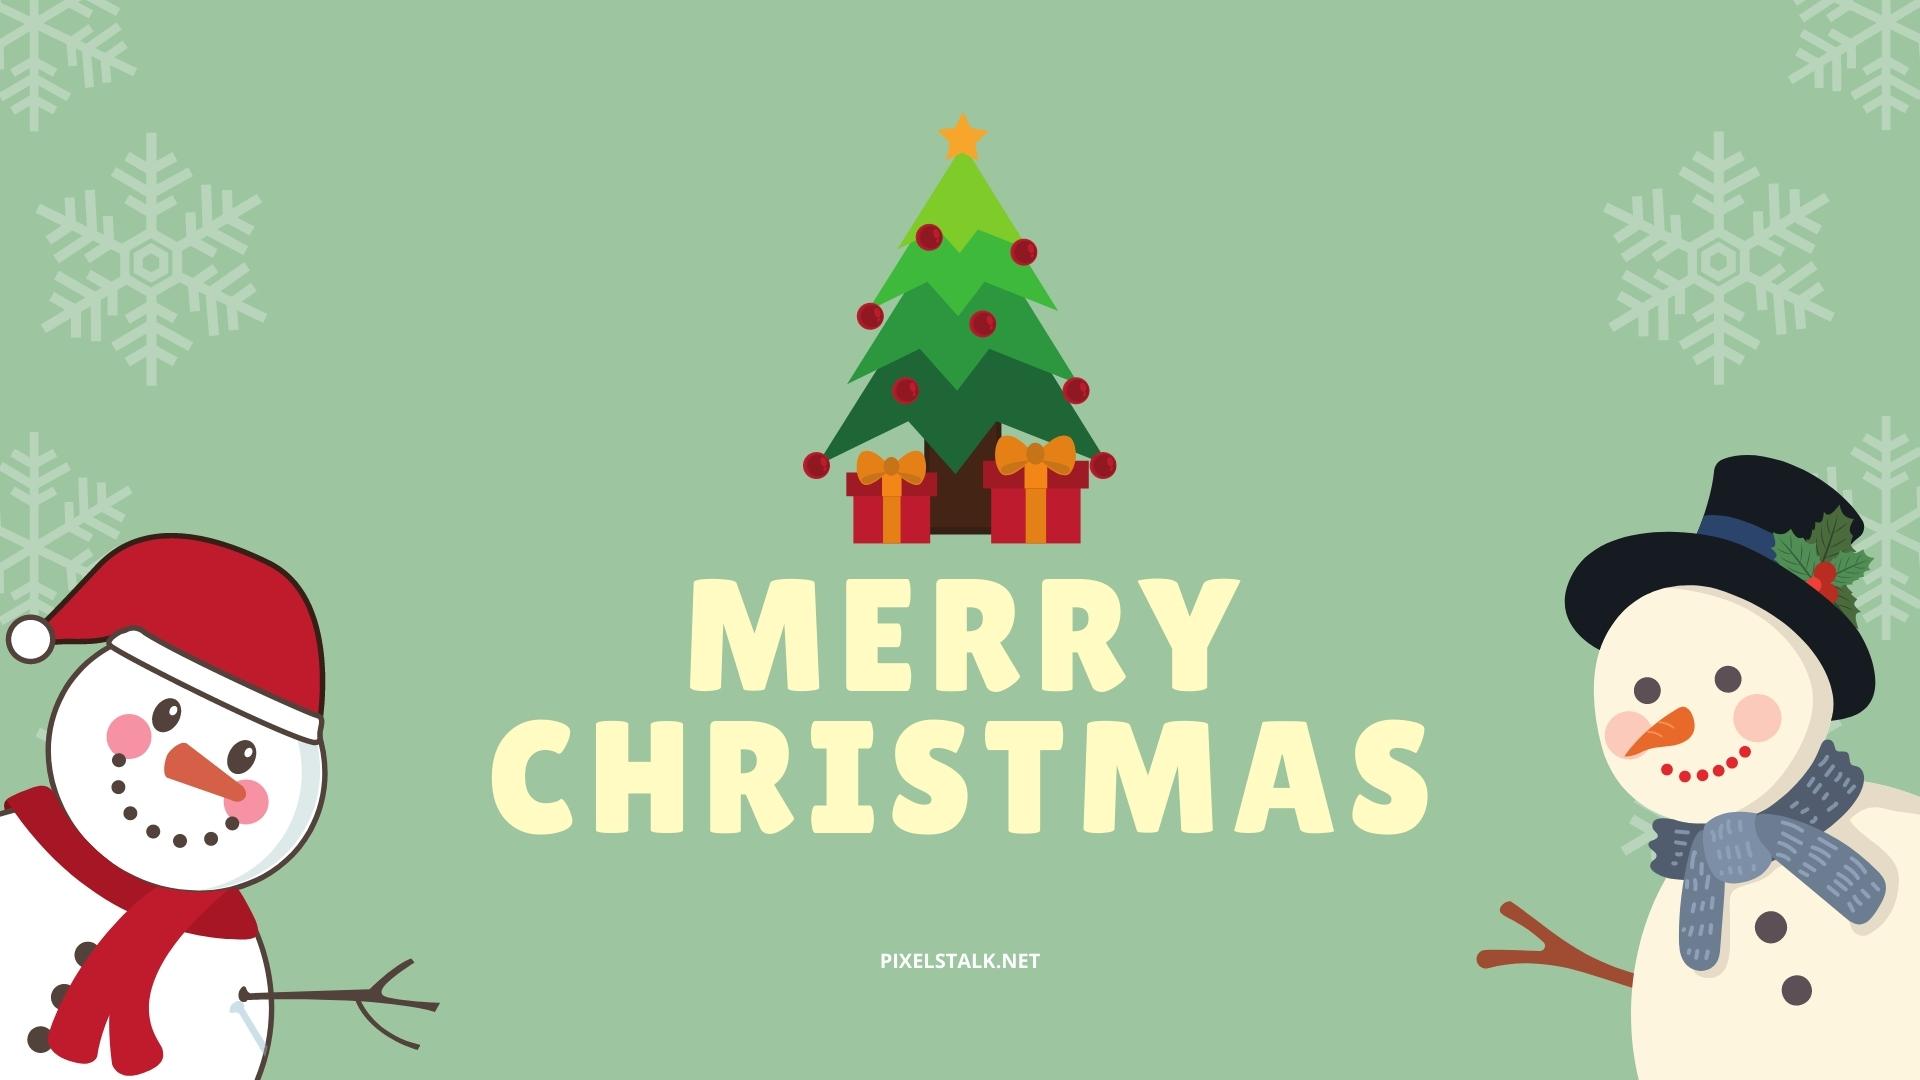 Merry Christmas Wallpapers HD free download 